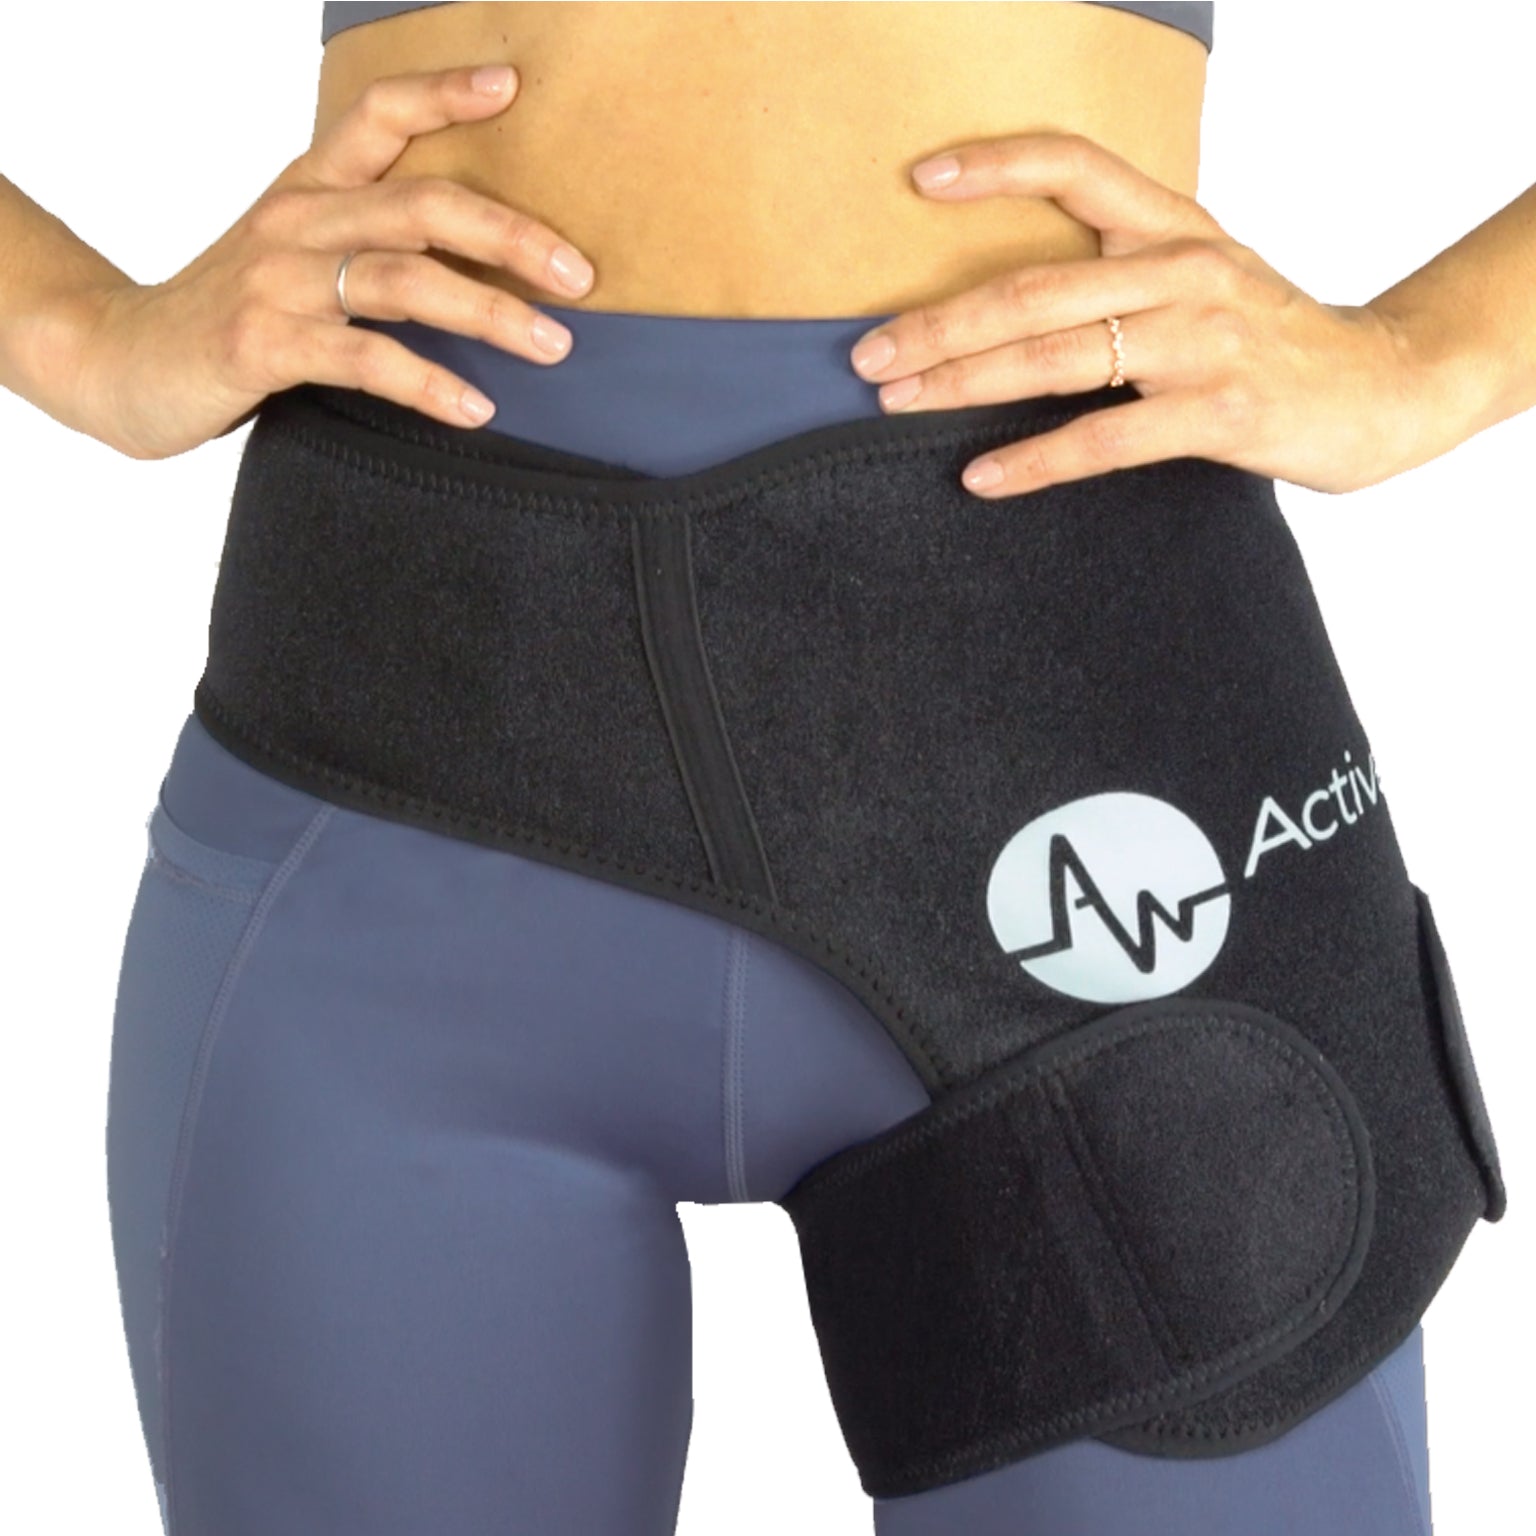 Universal Hip Compression Therapy System – Ezy Wrap